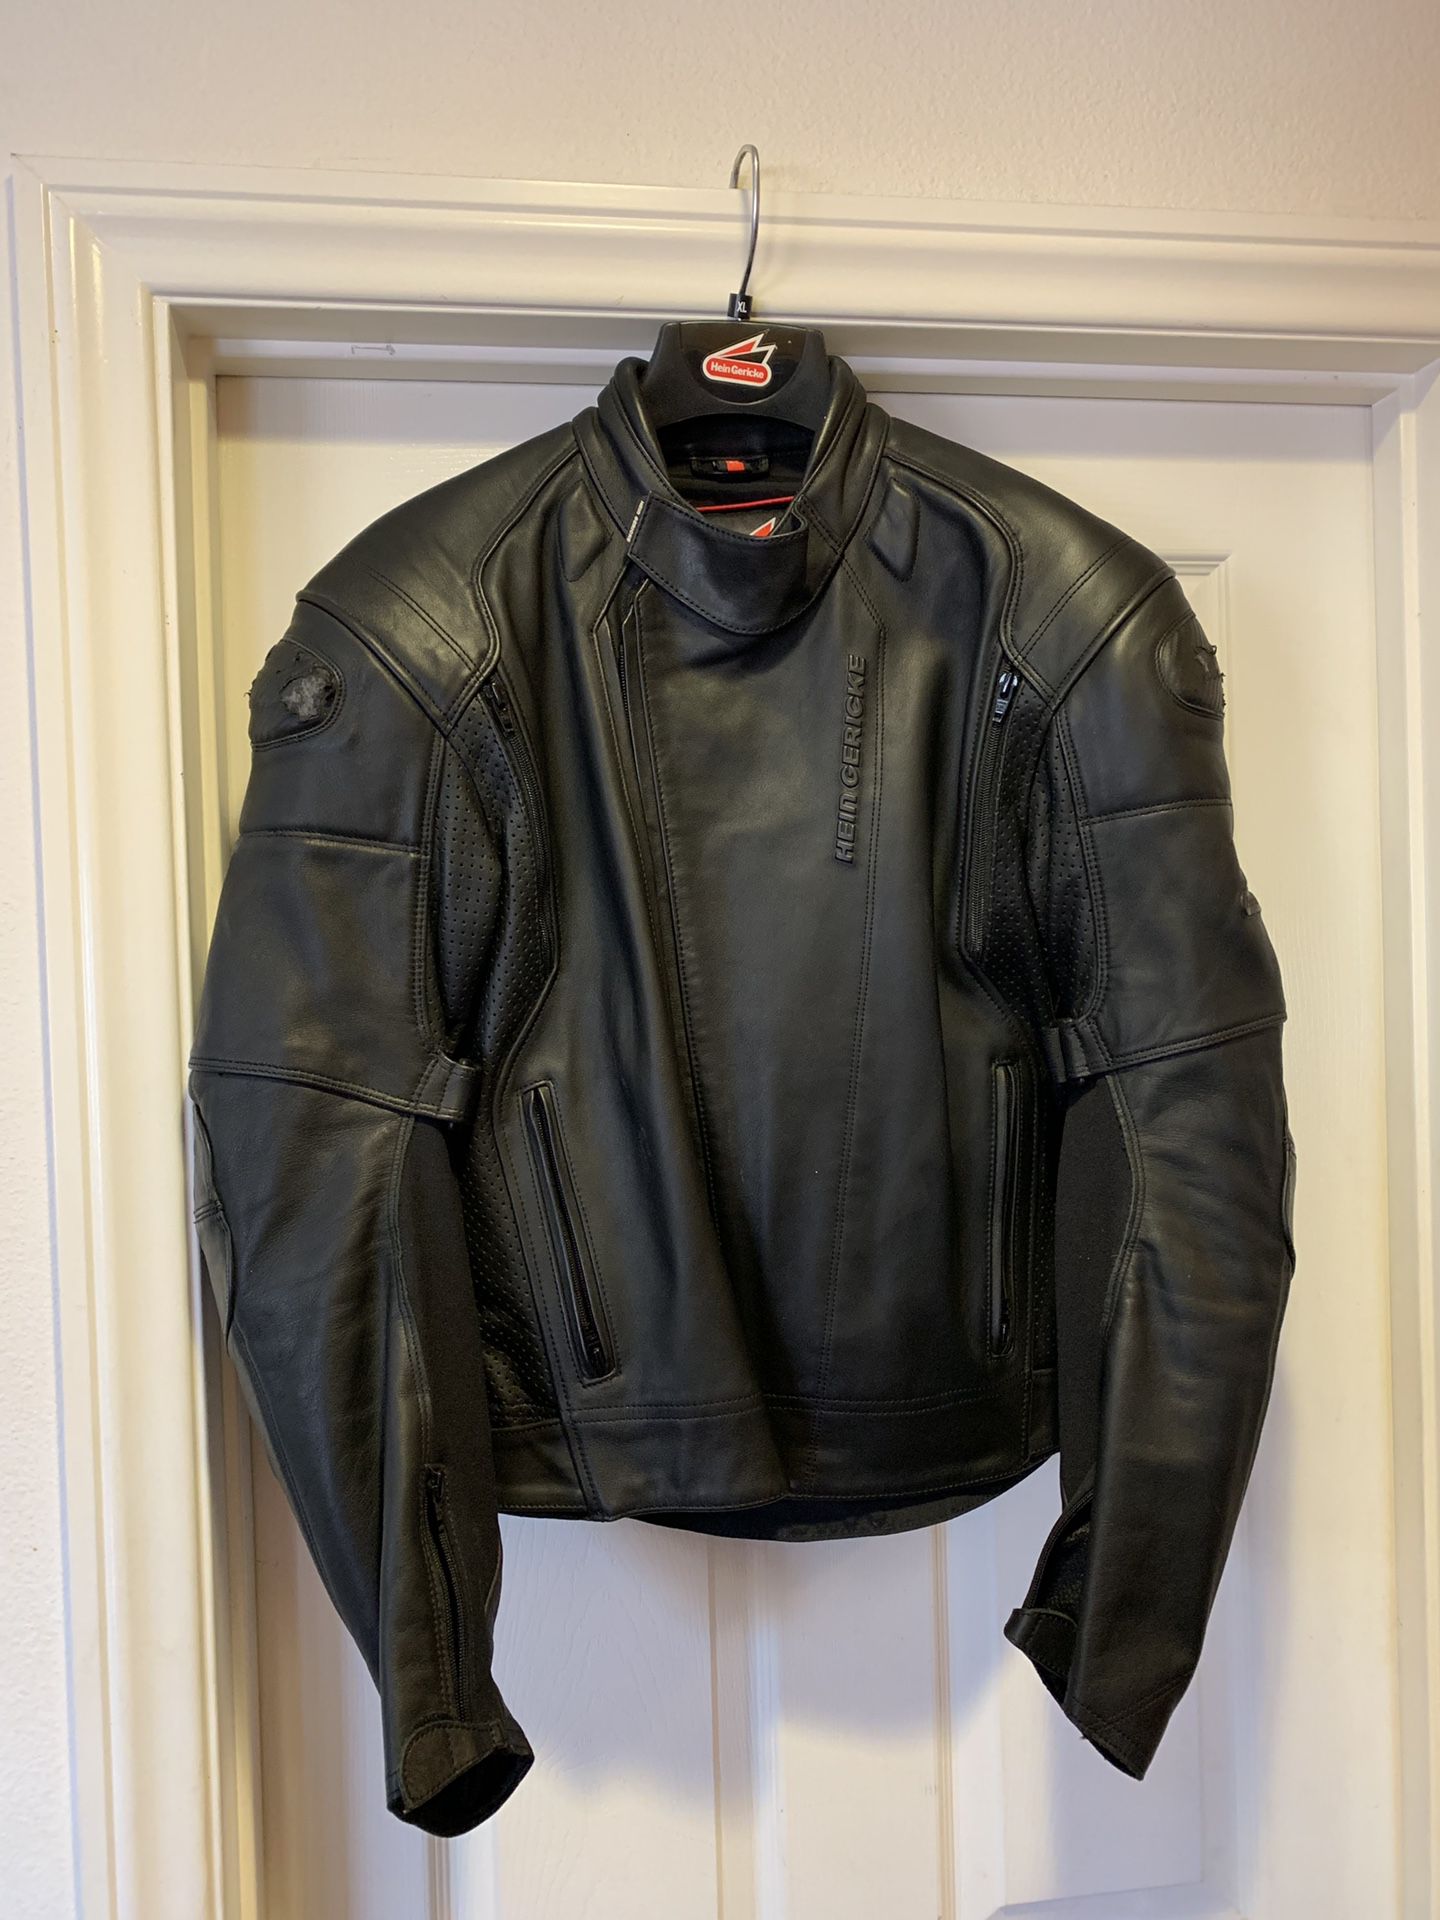 Hein Gericke motorcycle riding jacket in great condition XL $75